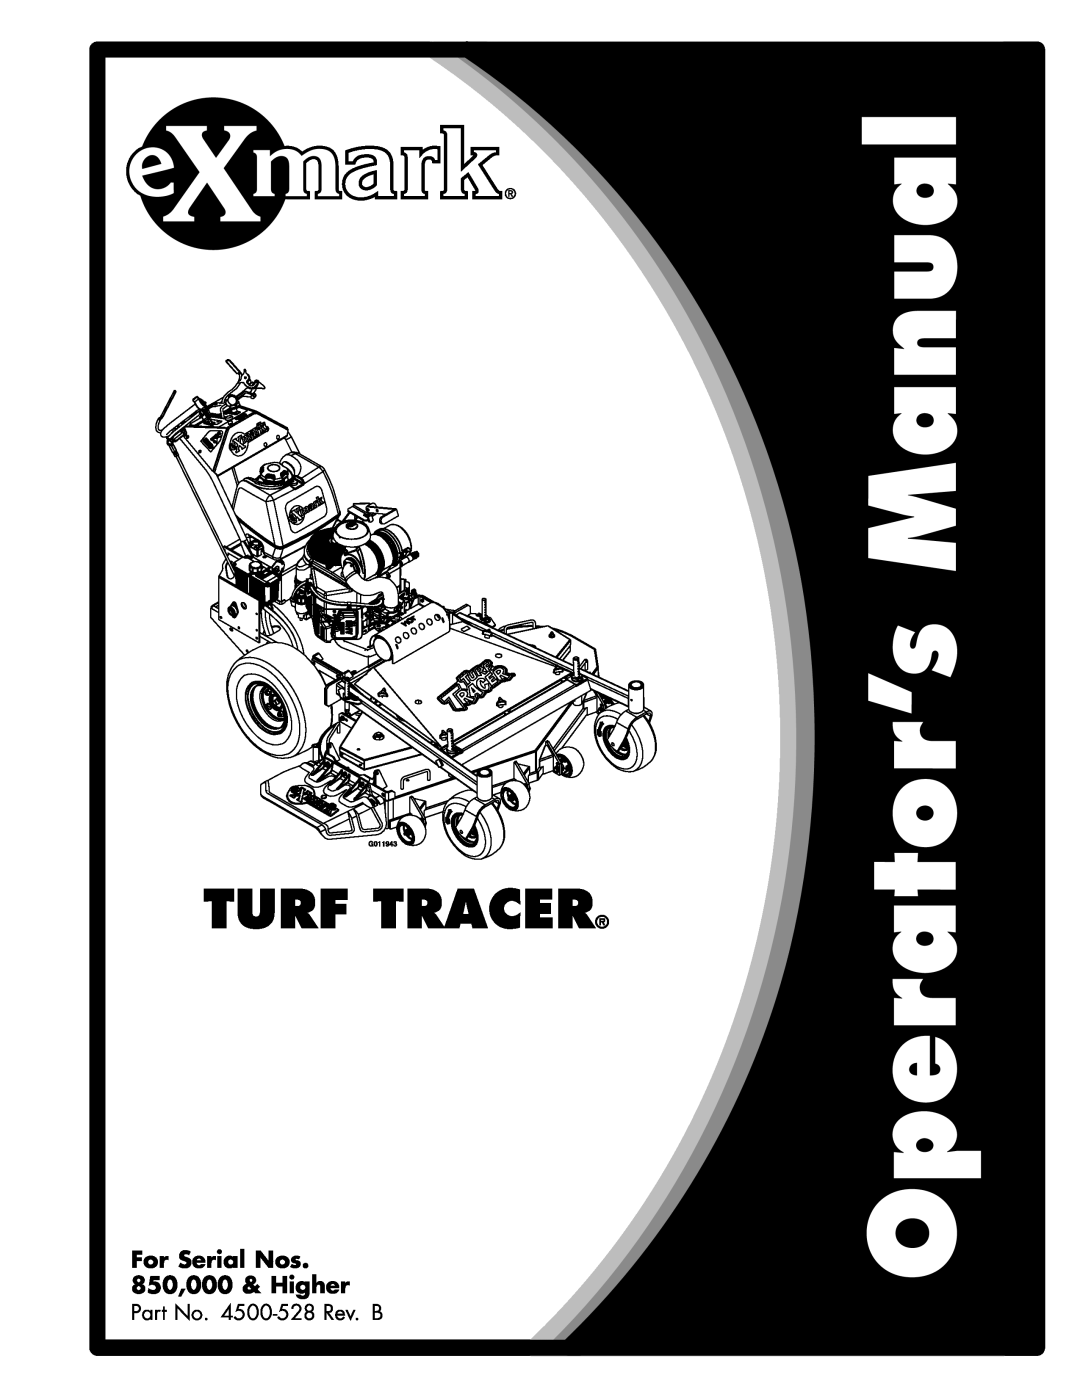 Exmark 4500-528 manual Turf Tracer, For Serial Nos 850,000 & Higher 